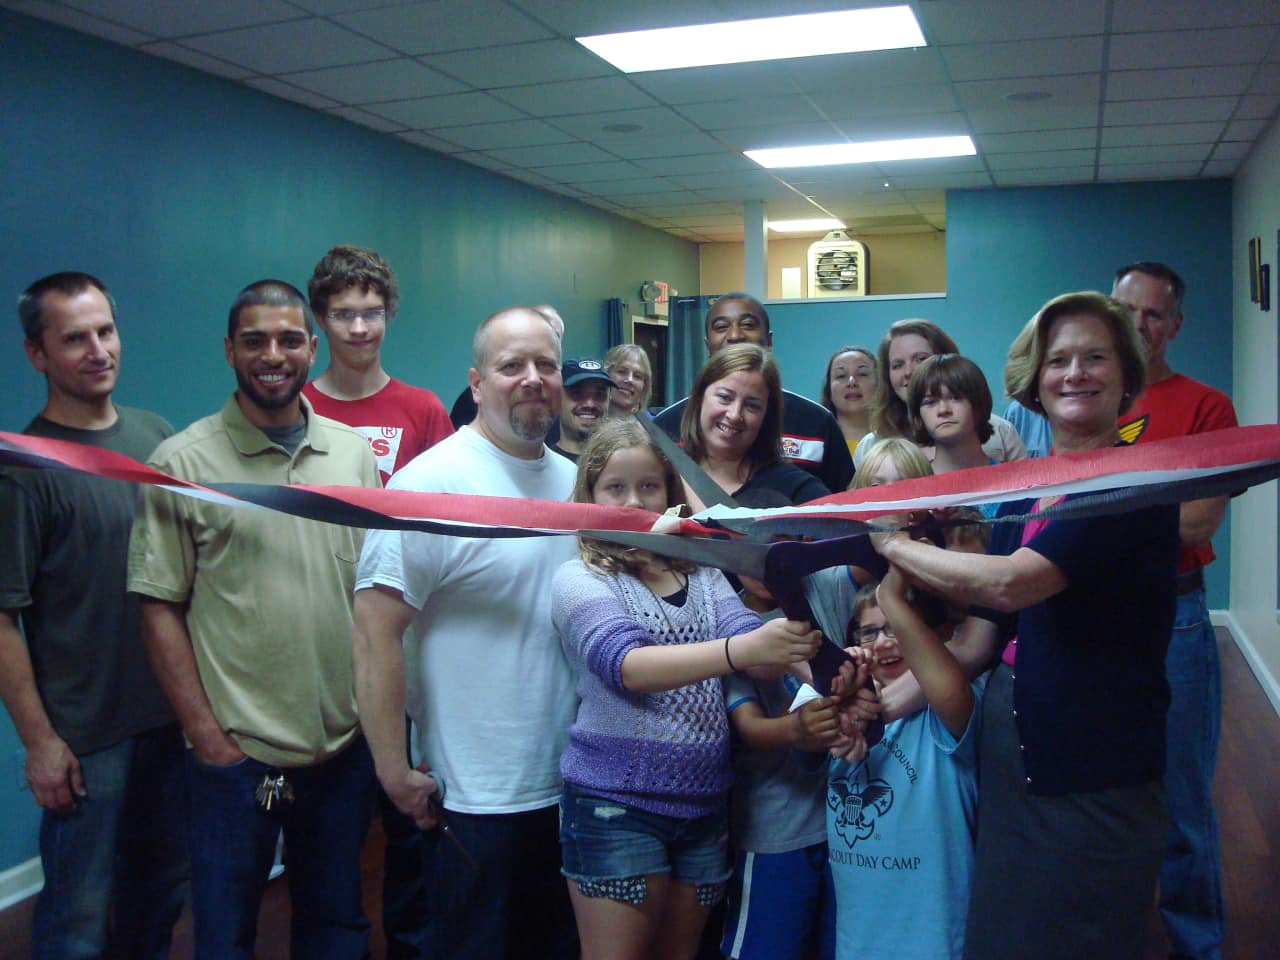 Owner Richard Norbutt recently held the grand opening for his new dojo, Triangle Way Karate, at 155 Route 202 in the Lindolndale Village Plaze.